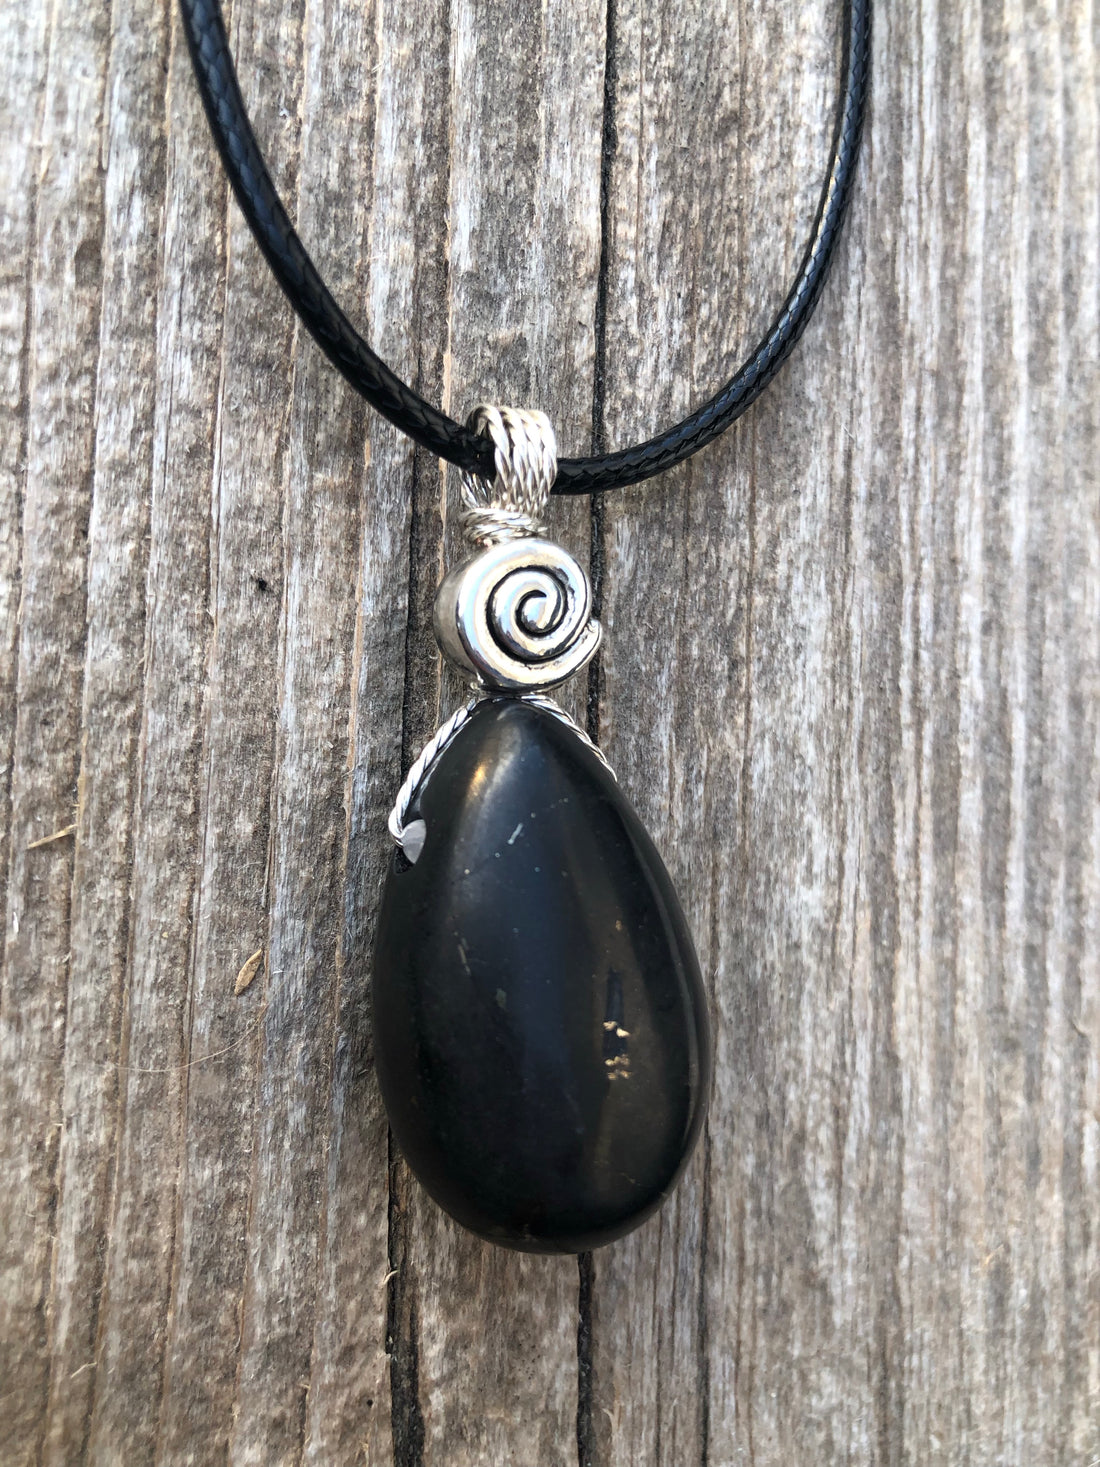 Shungite Necklace for Protection. Swirl Signifies Consciousness